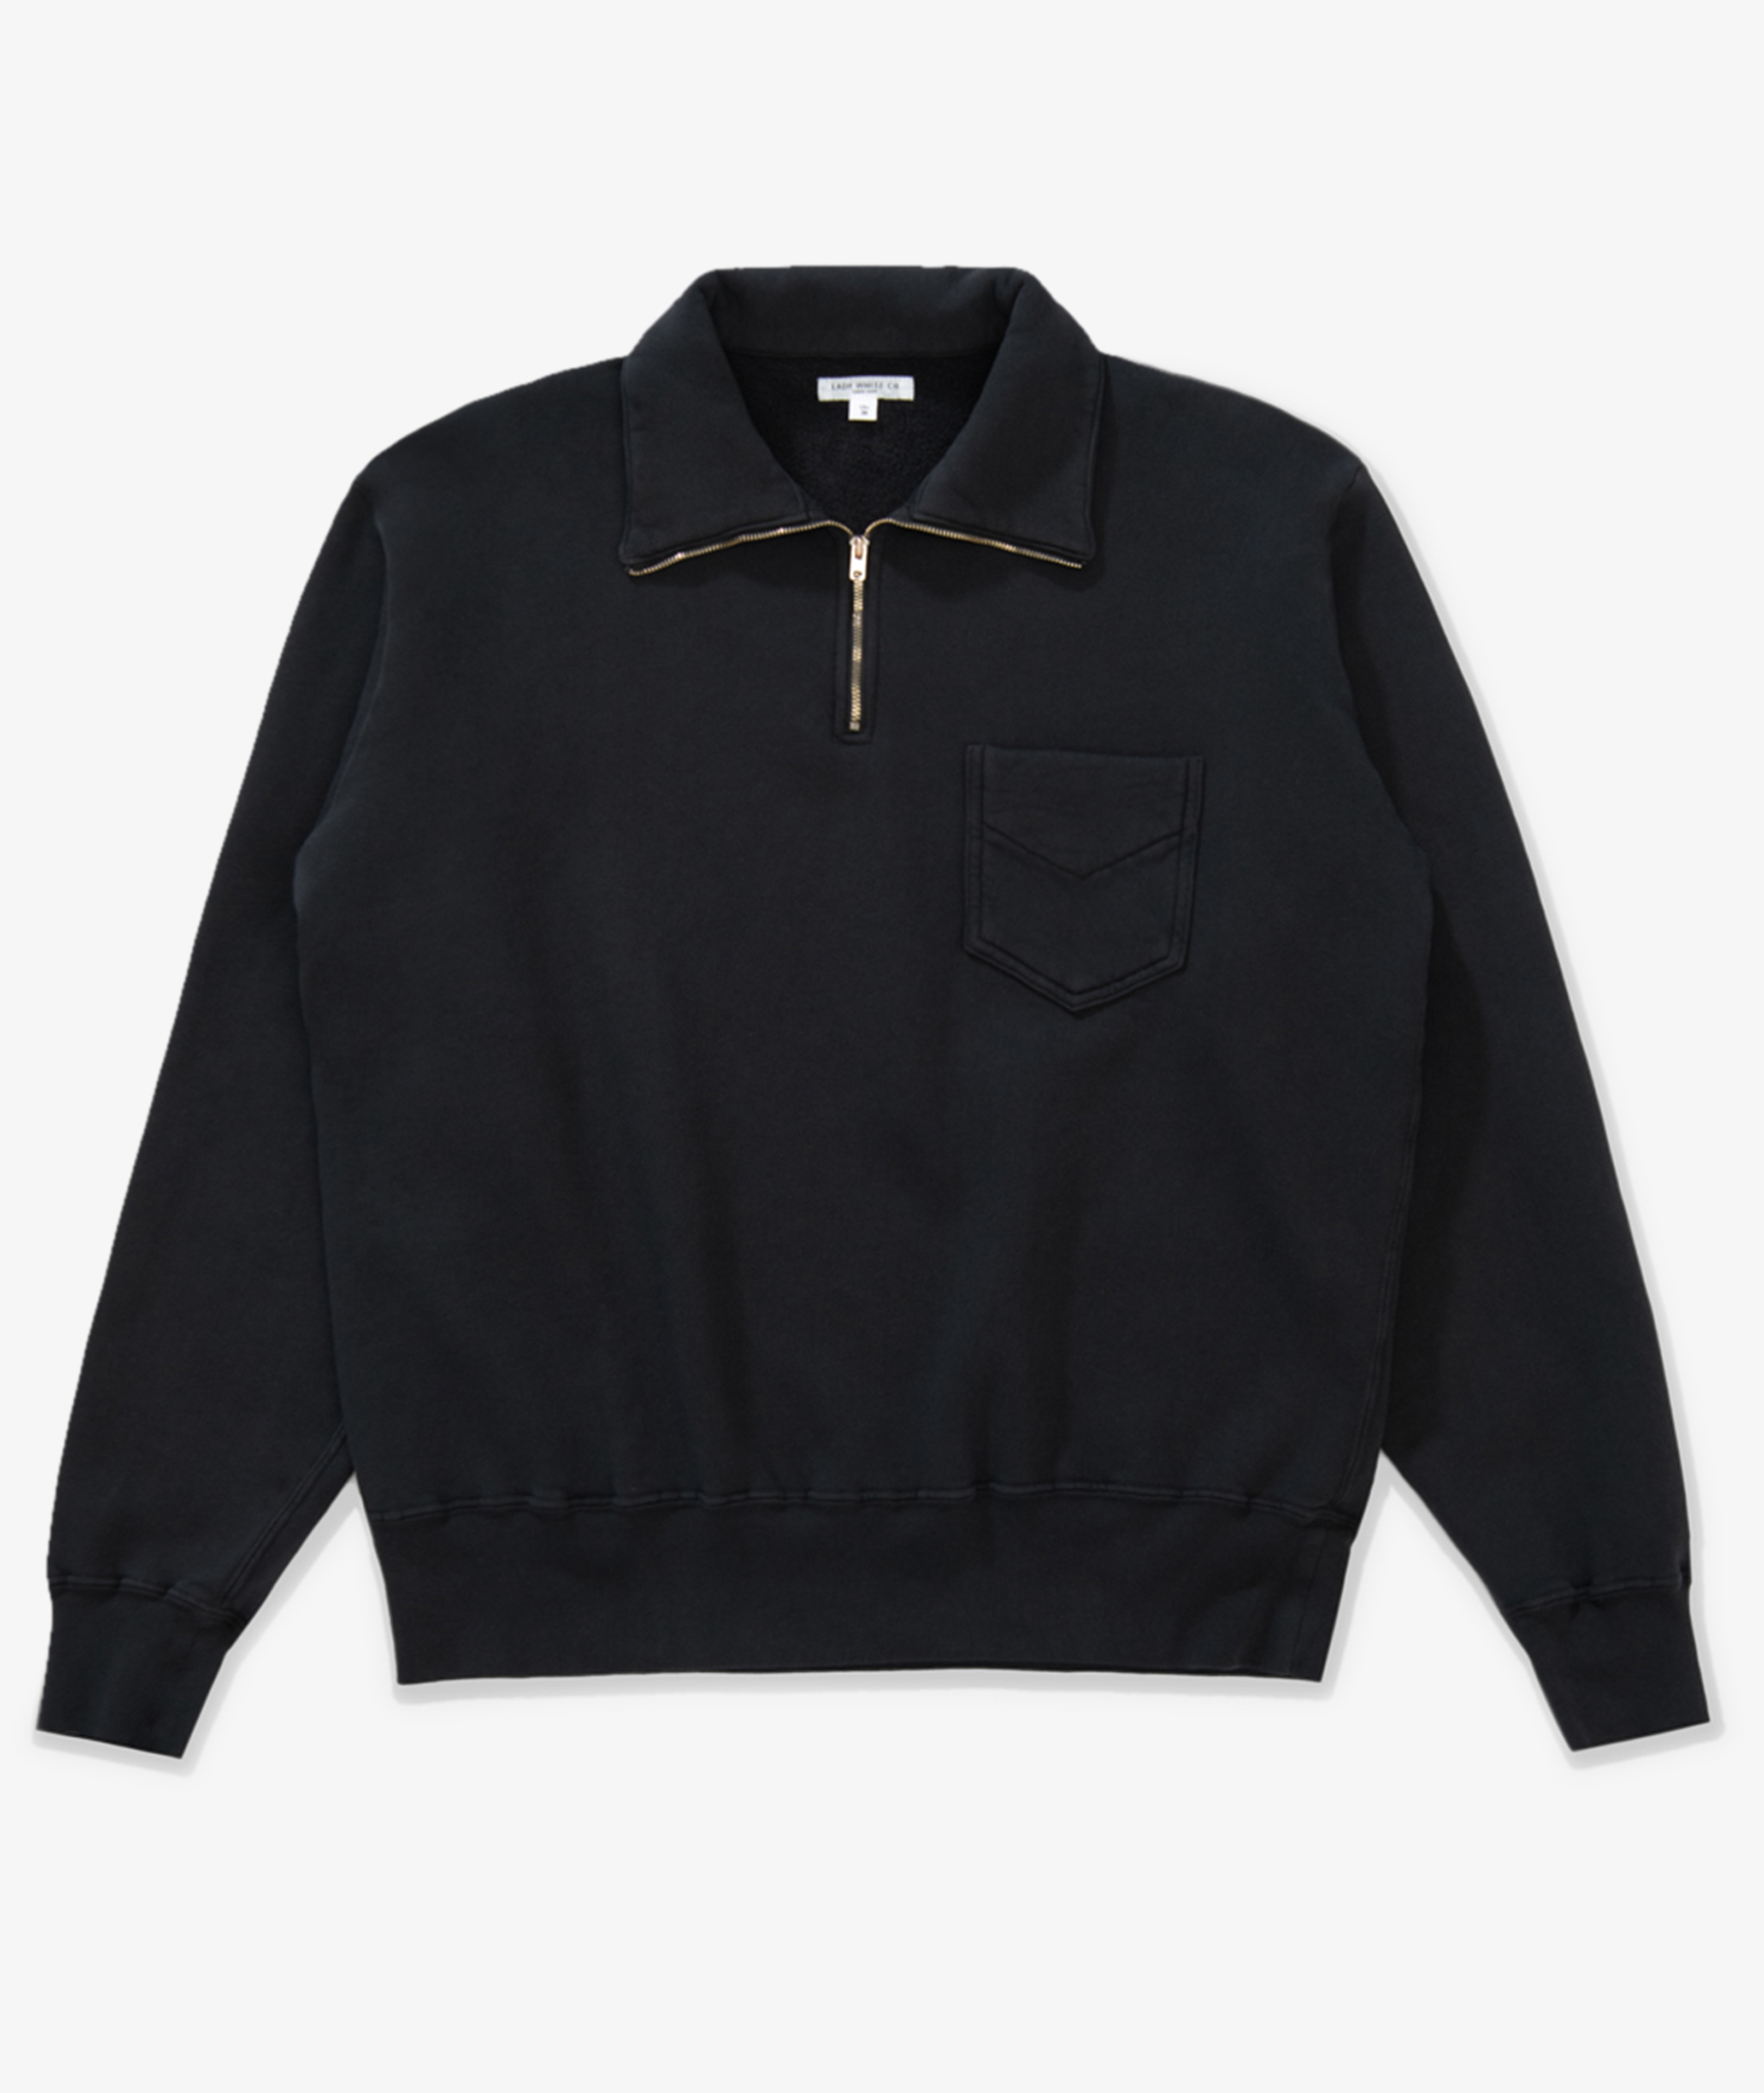 Norse Store | Shipping Worldwide - Lady White Co. Quarter Zip